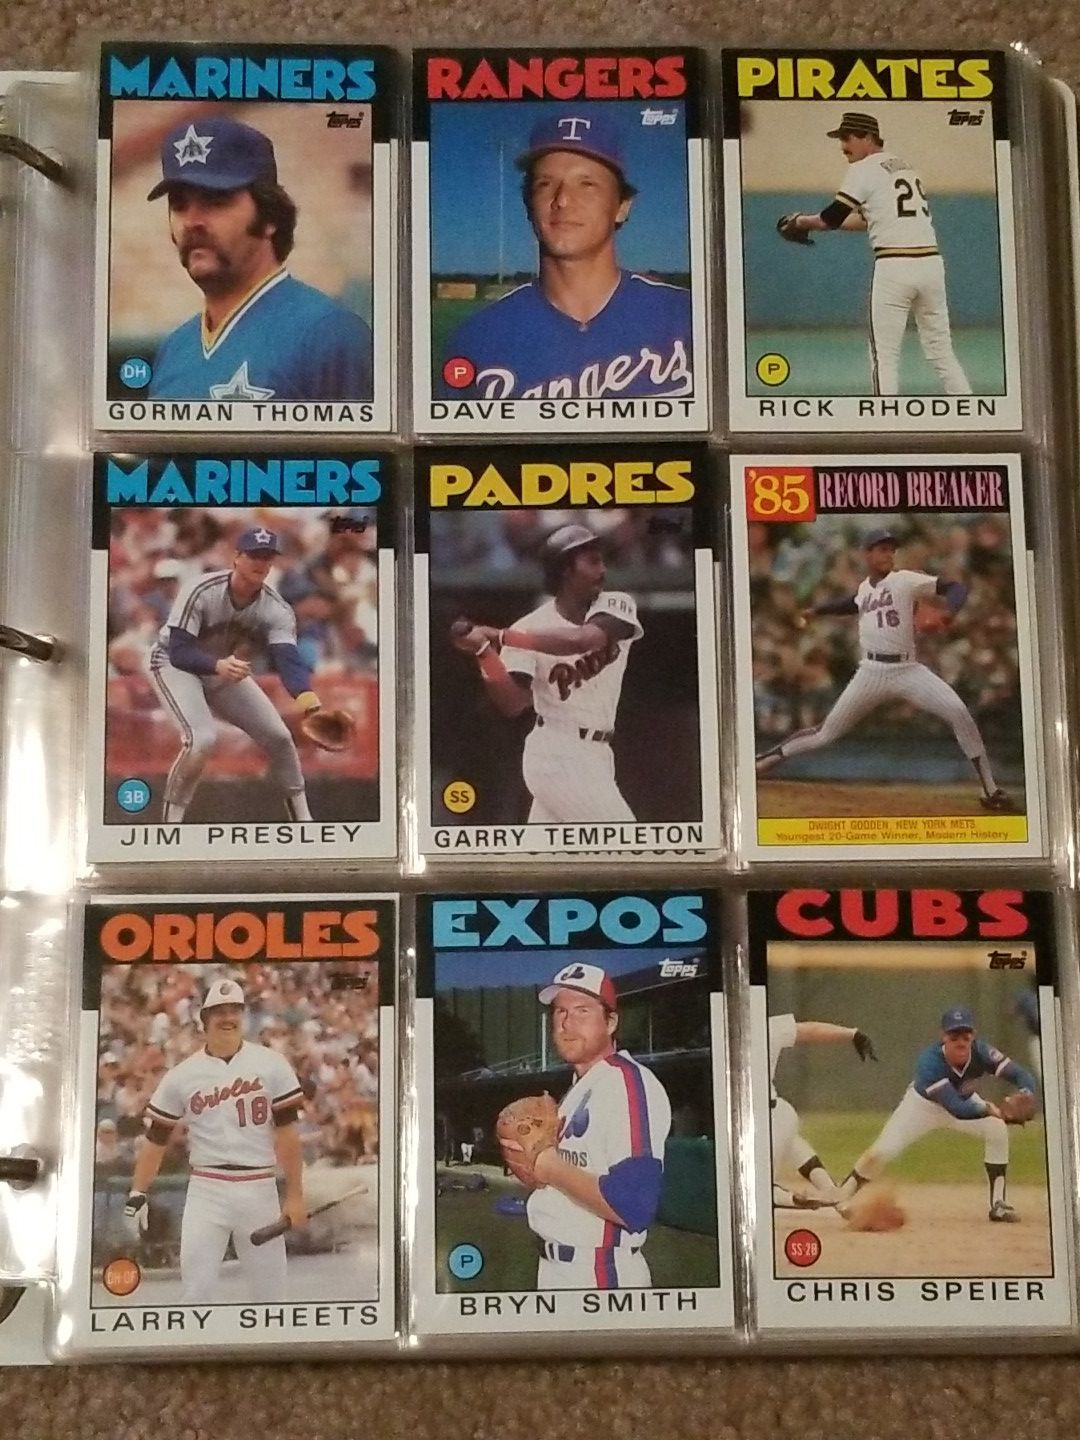 Over 300 excellent condition 1986 Topps Baseball Cards